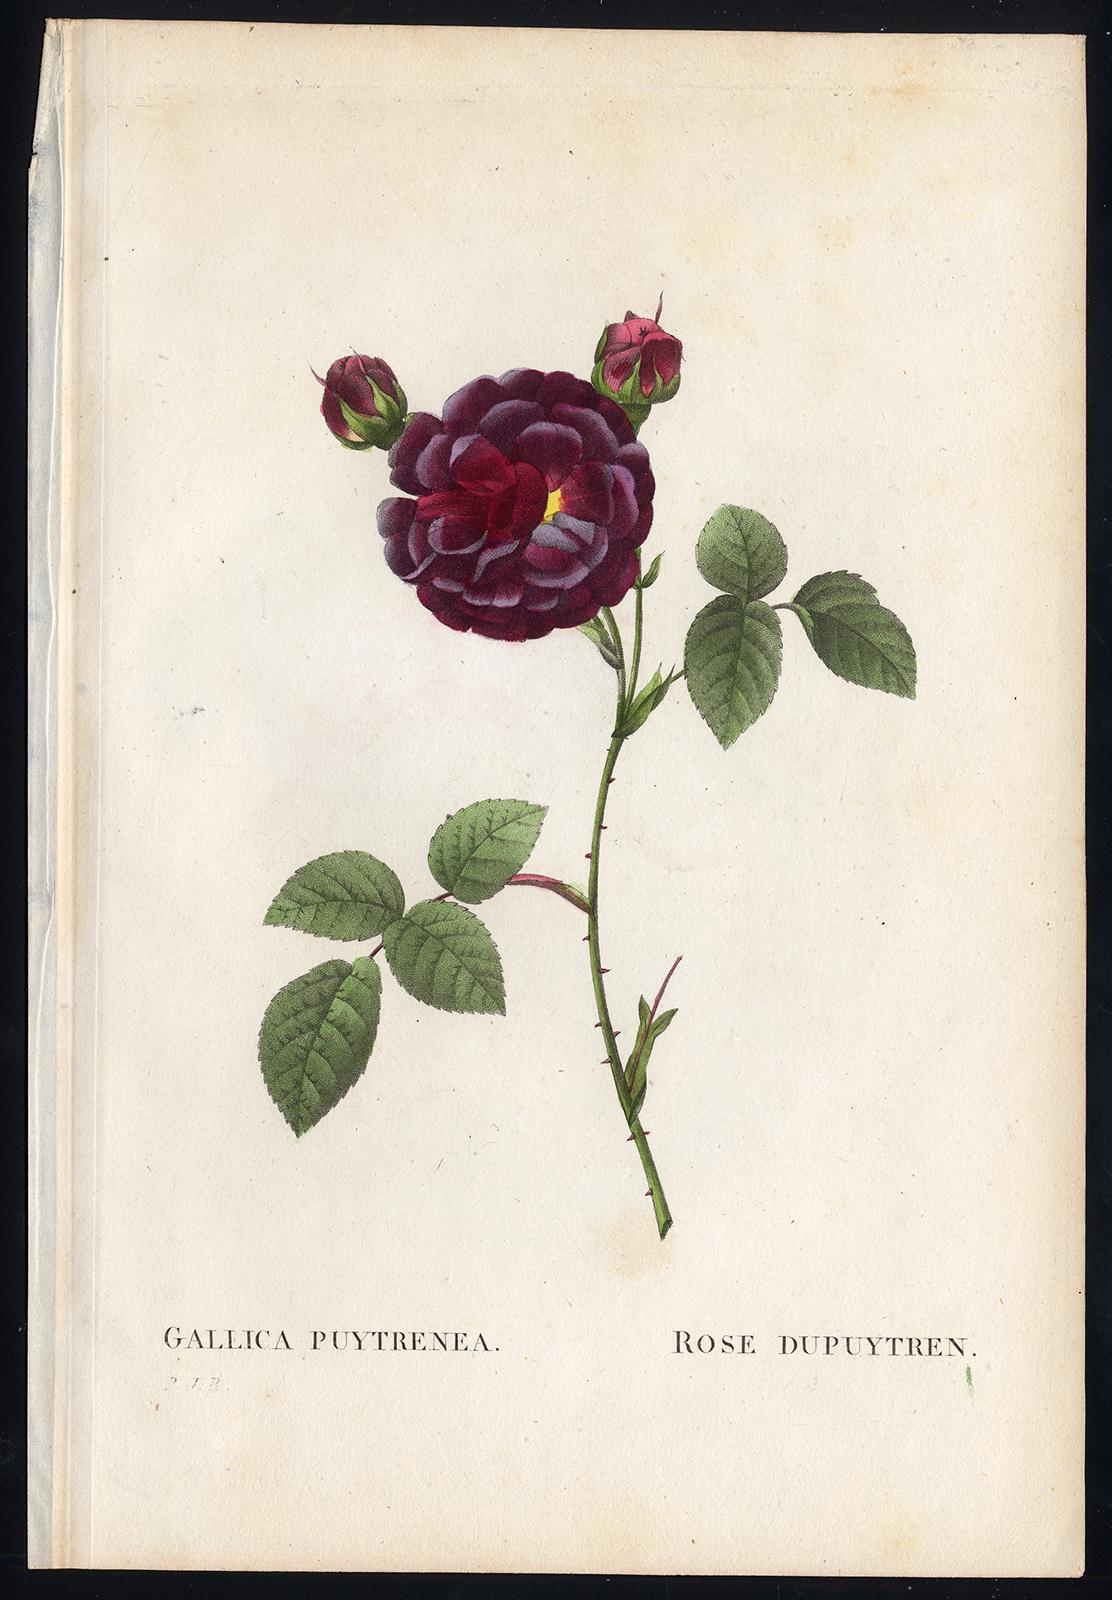 Pierre-Joseph Redouté Print - Gallica Puytrenea by Redoute - Les Roses - Handcoloured engraving - 19th century